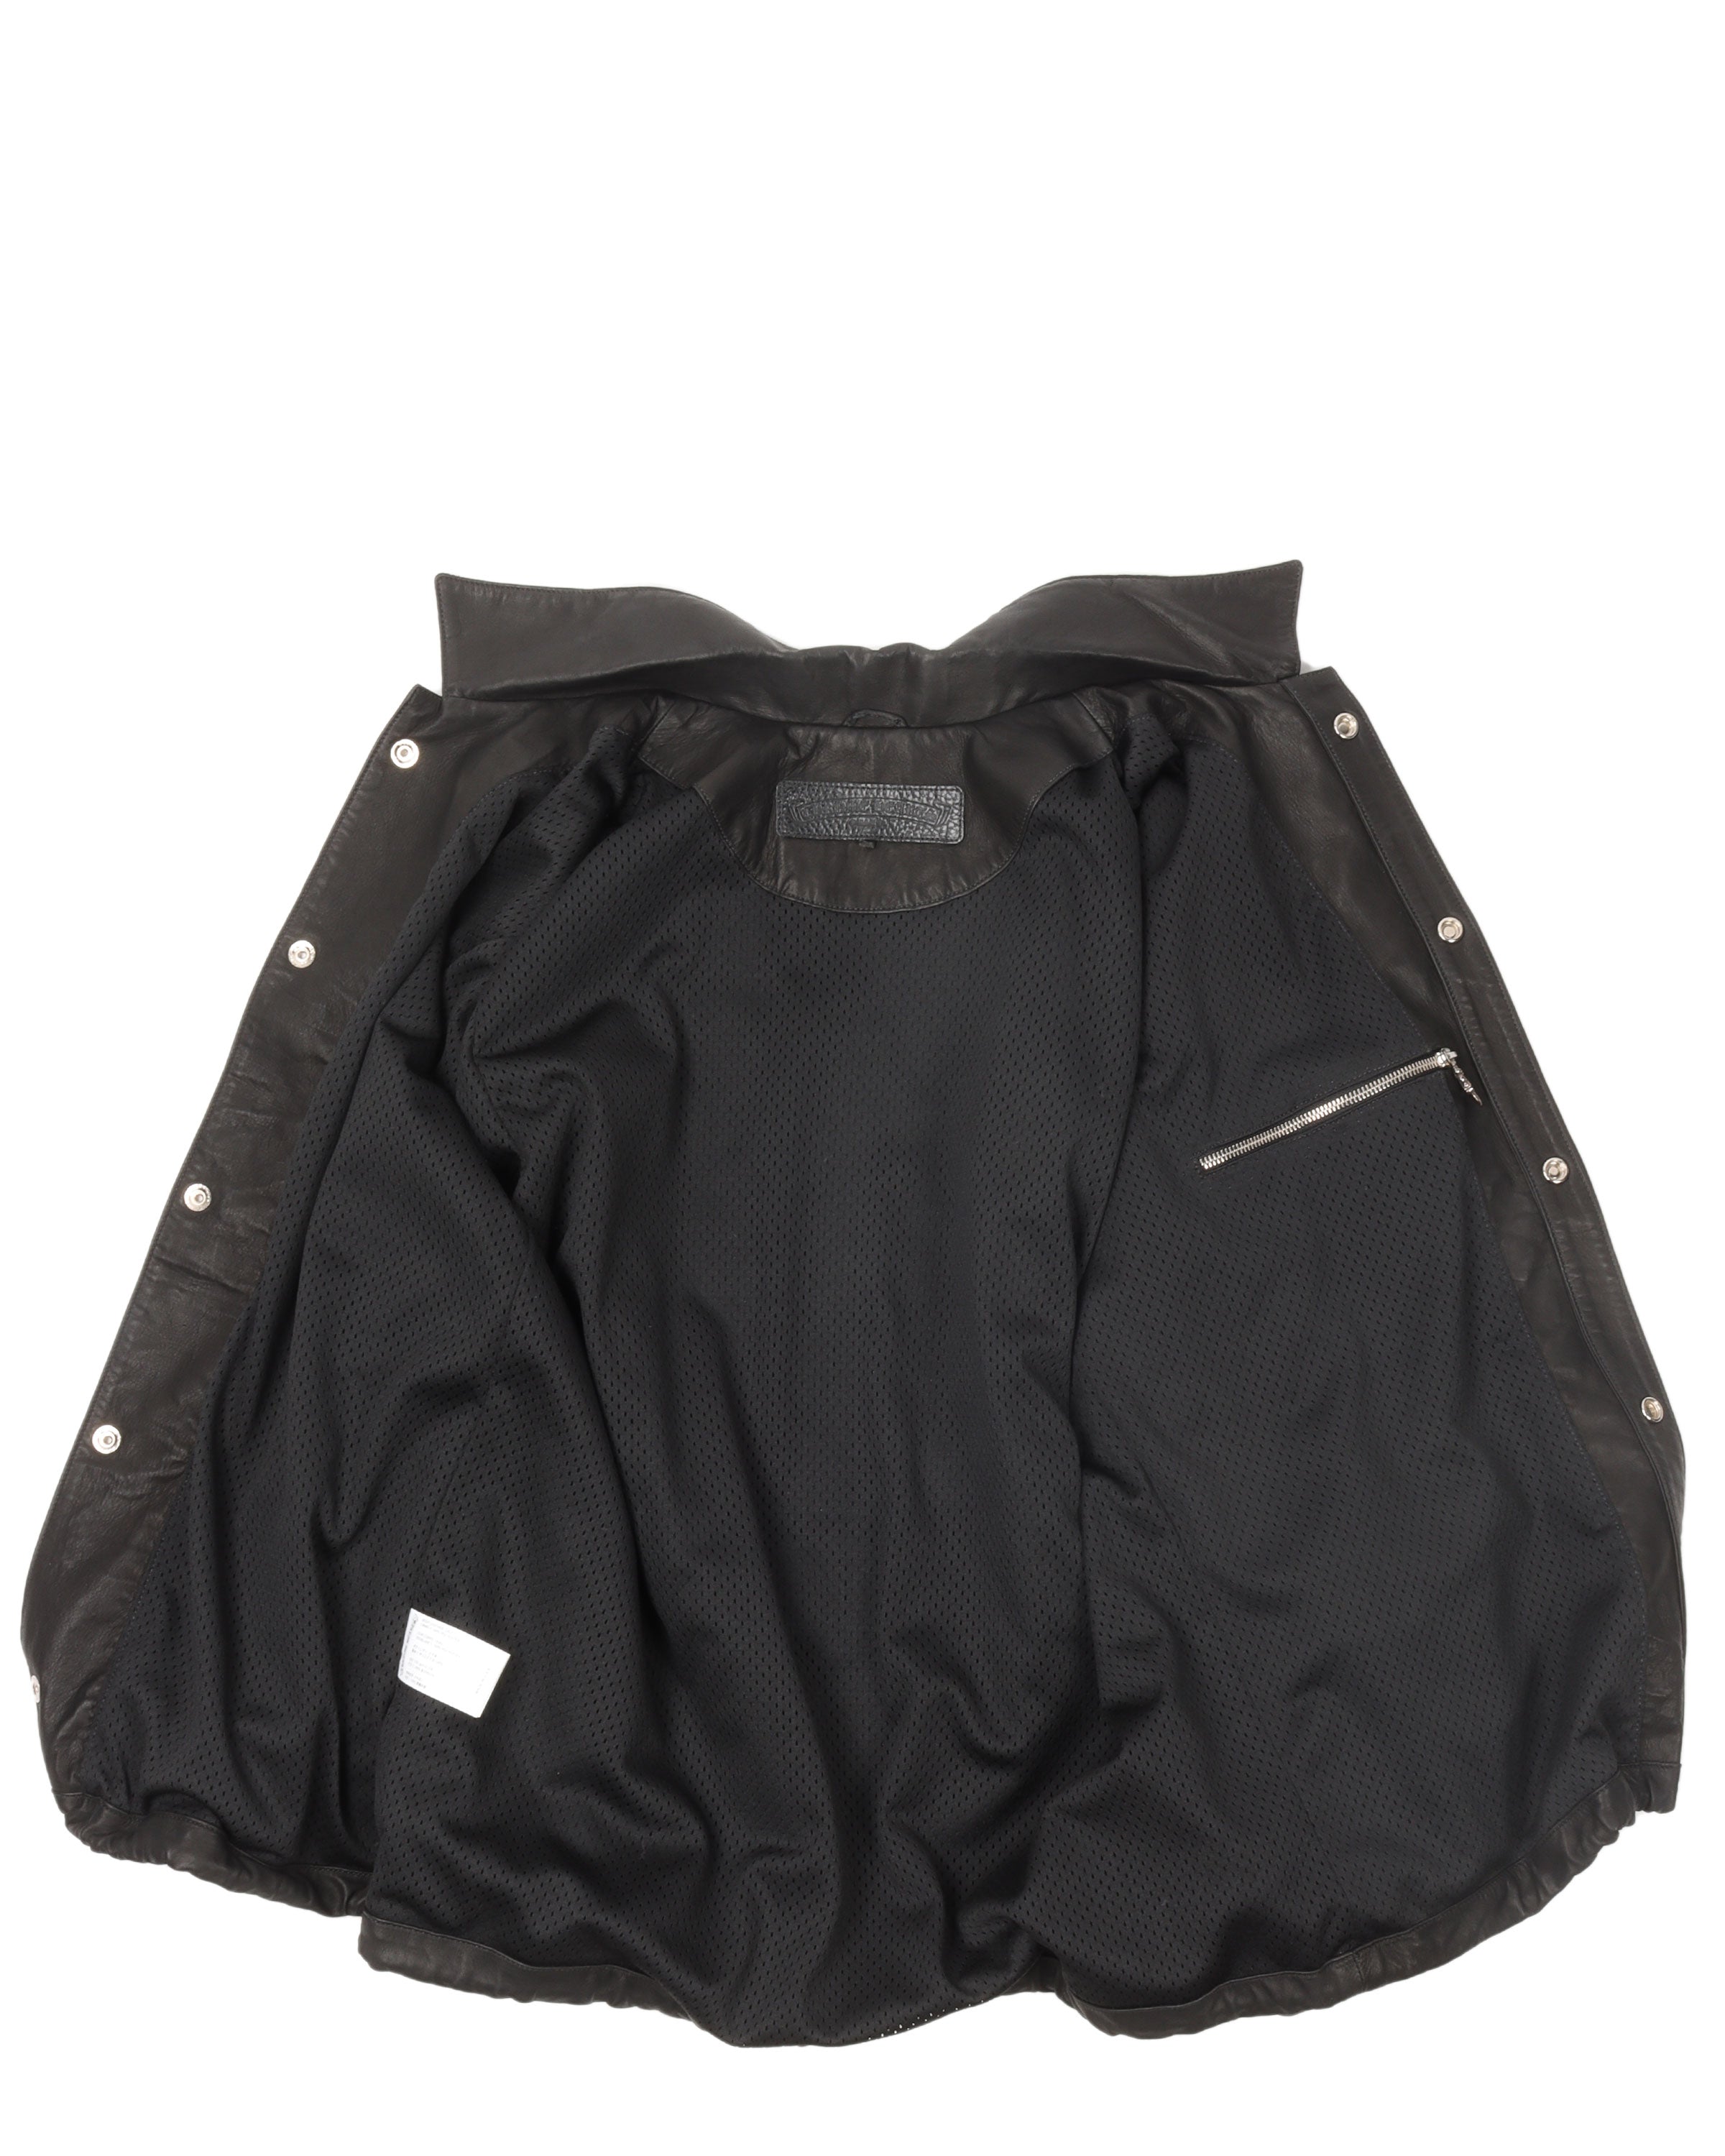 Leather Patched Coach Jacket